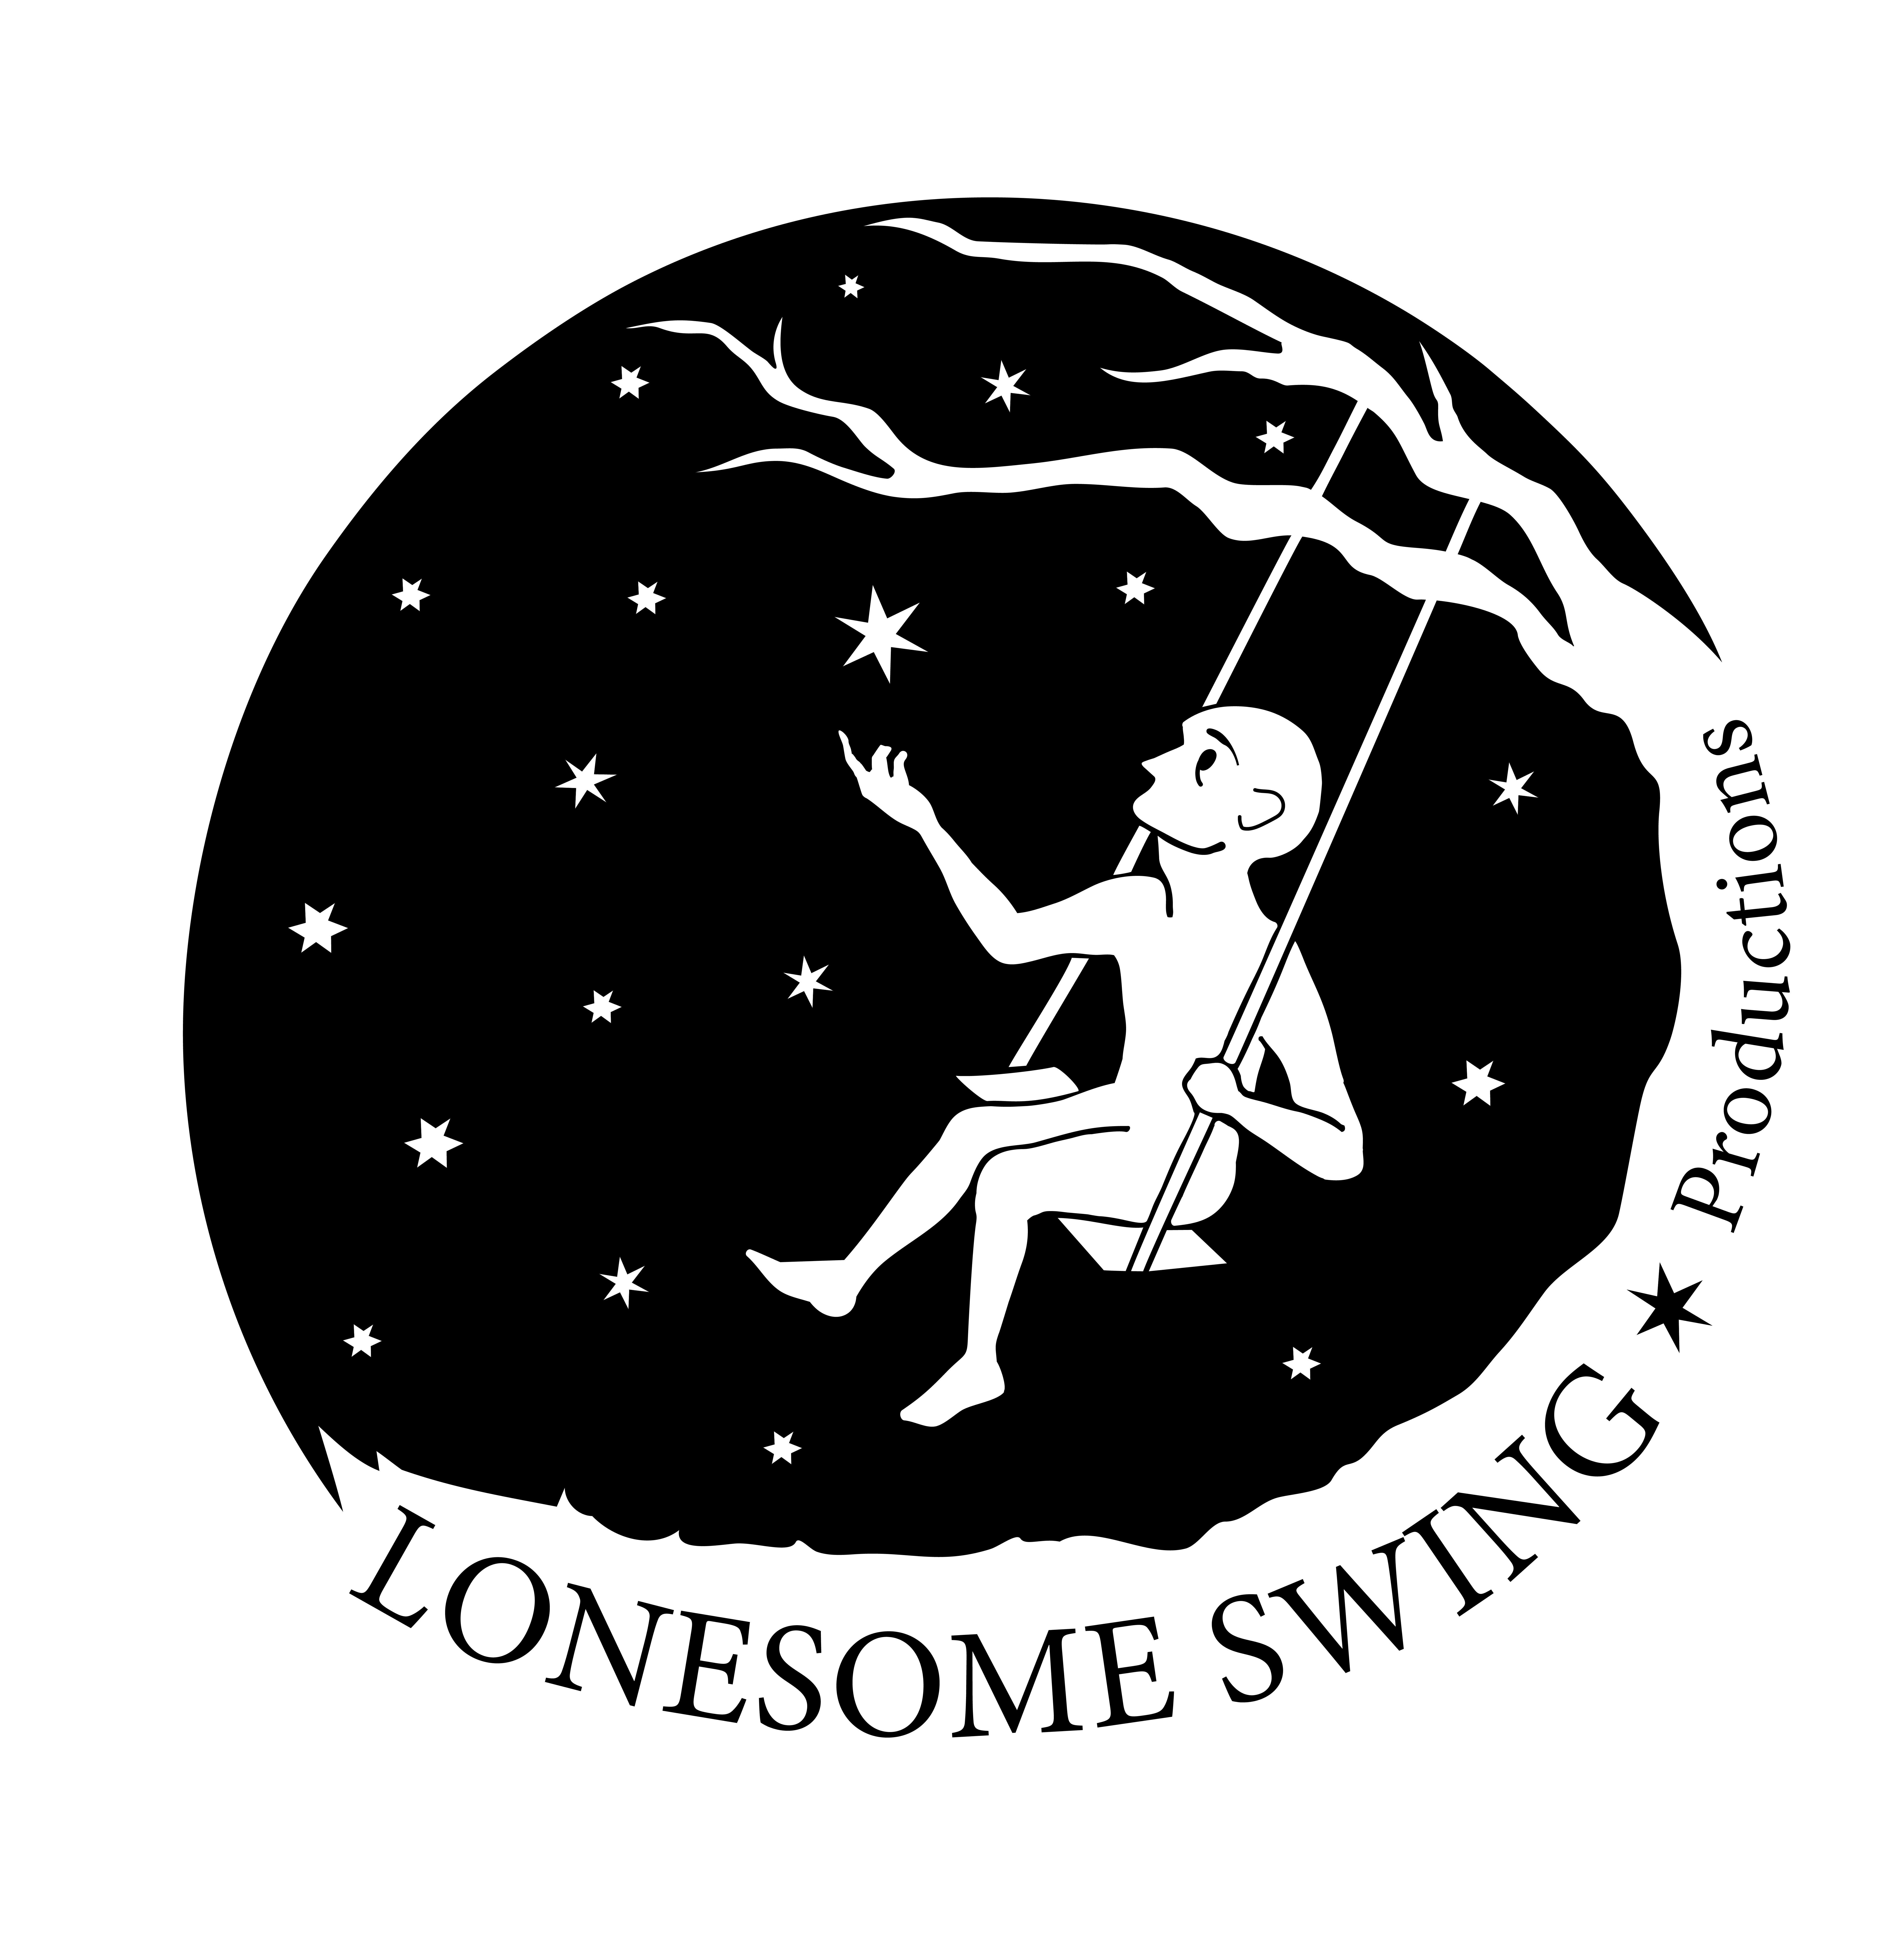 Lonesome Swing Productions